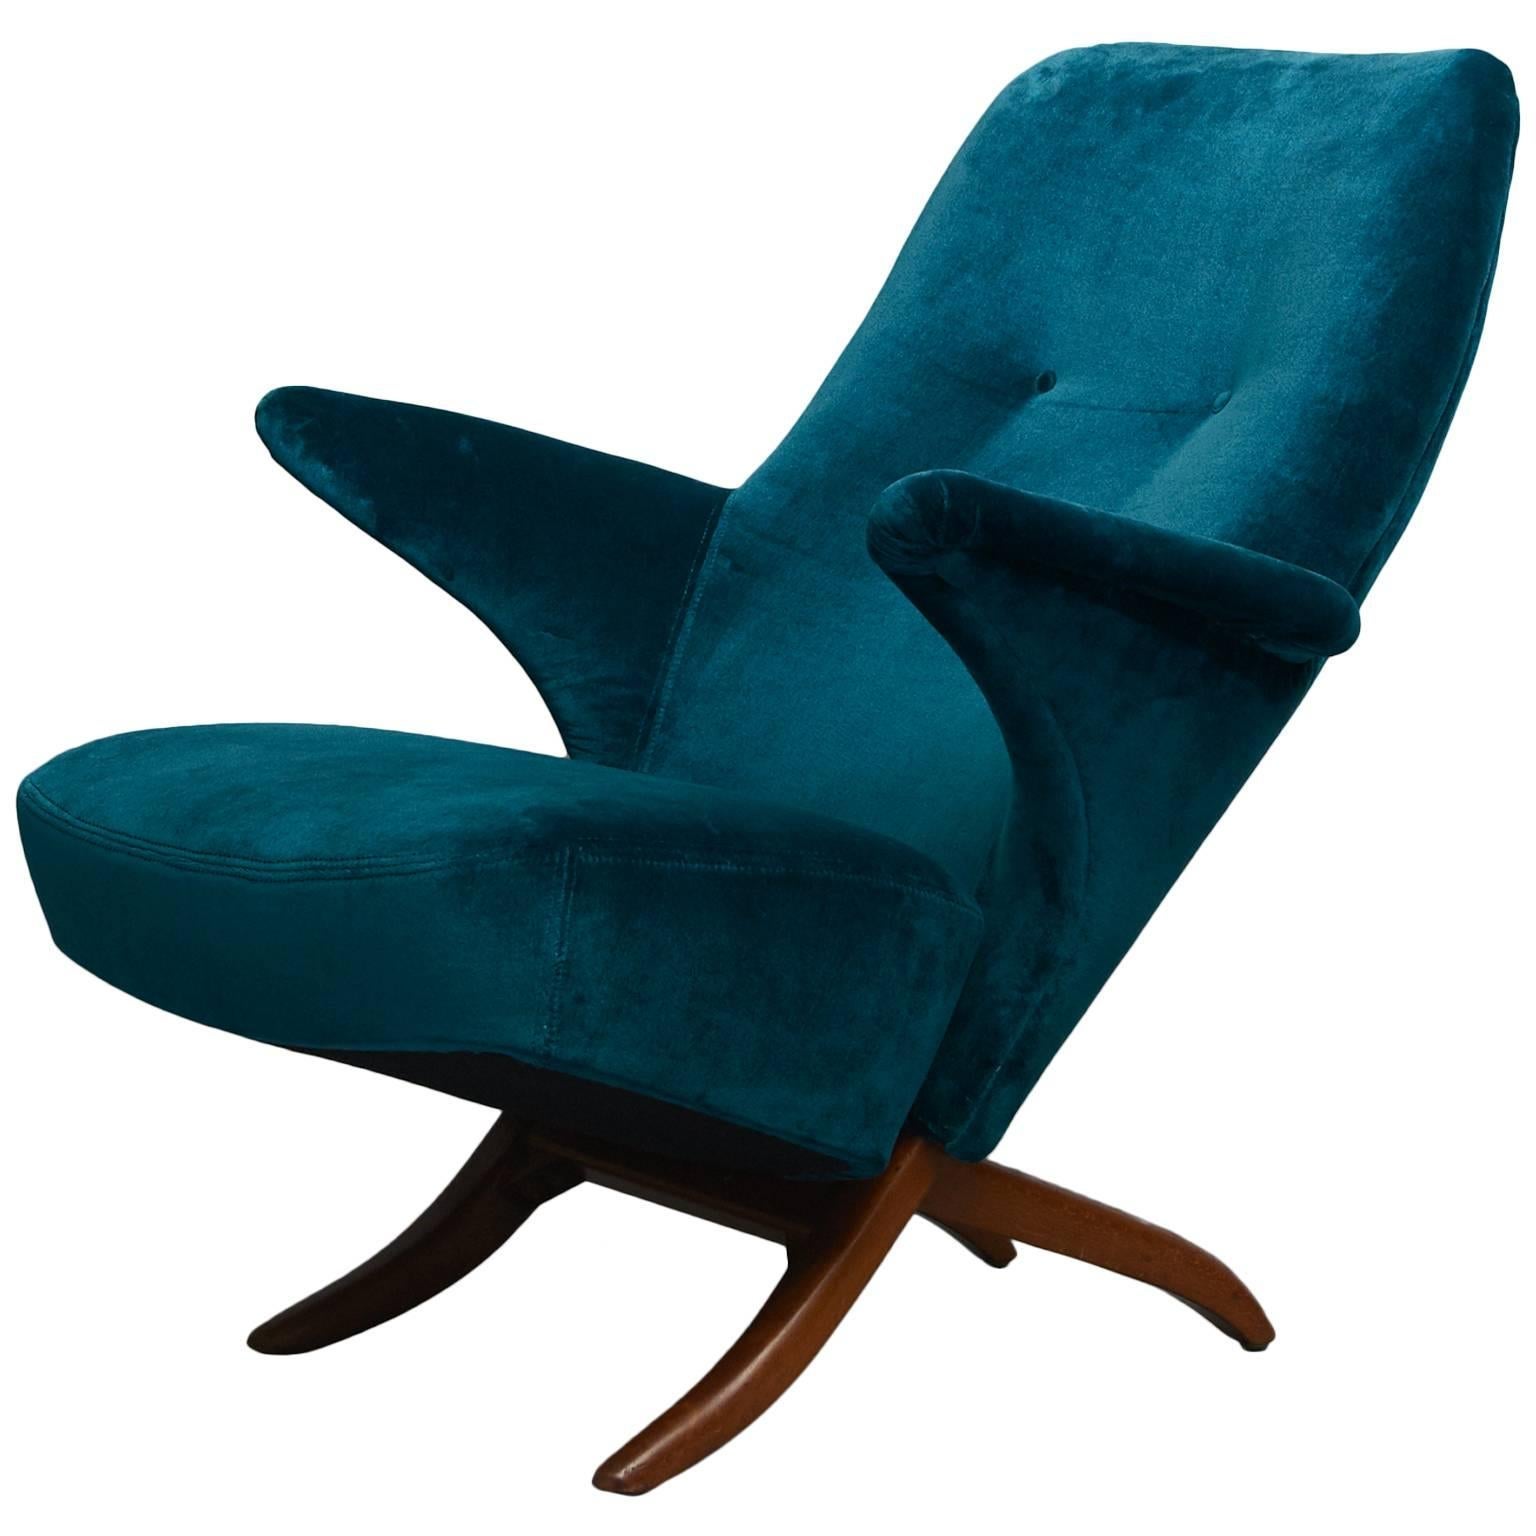 Theo Ruth Penguin Chair